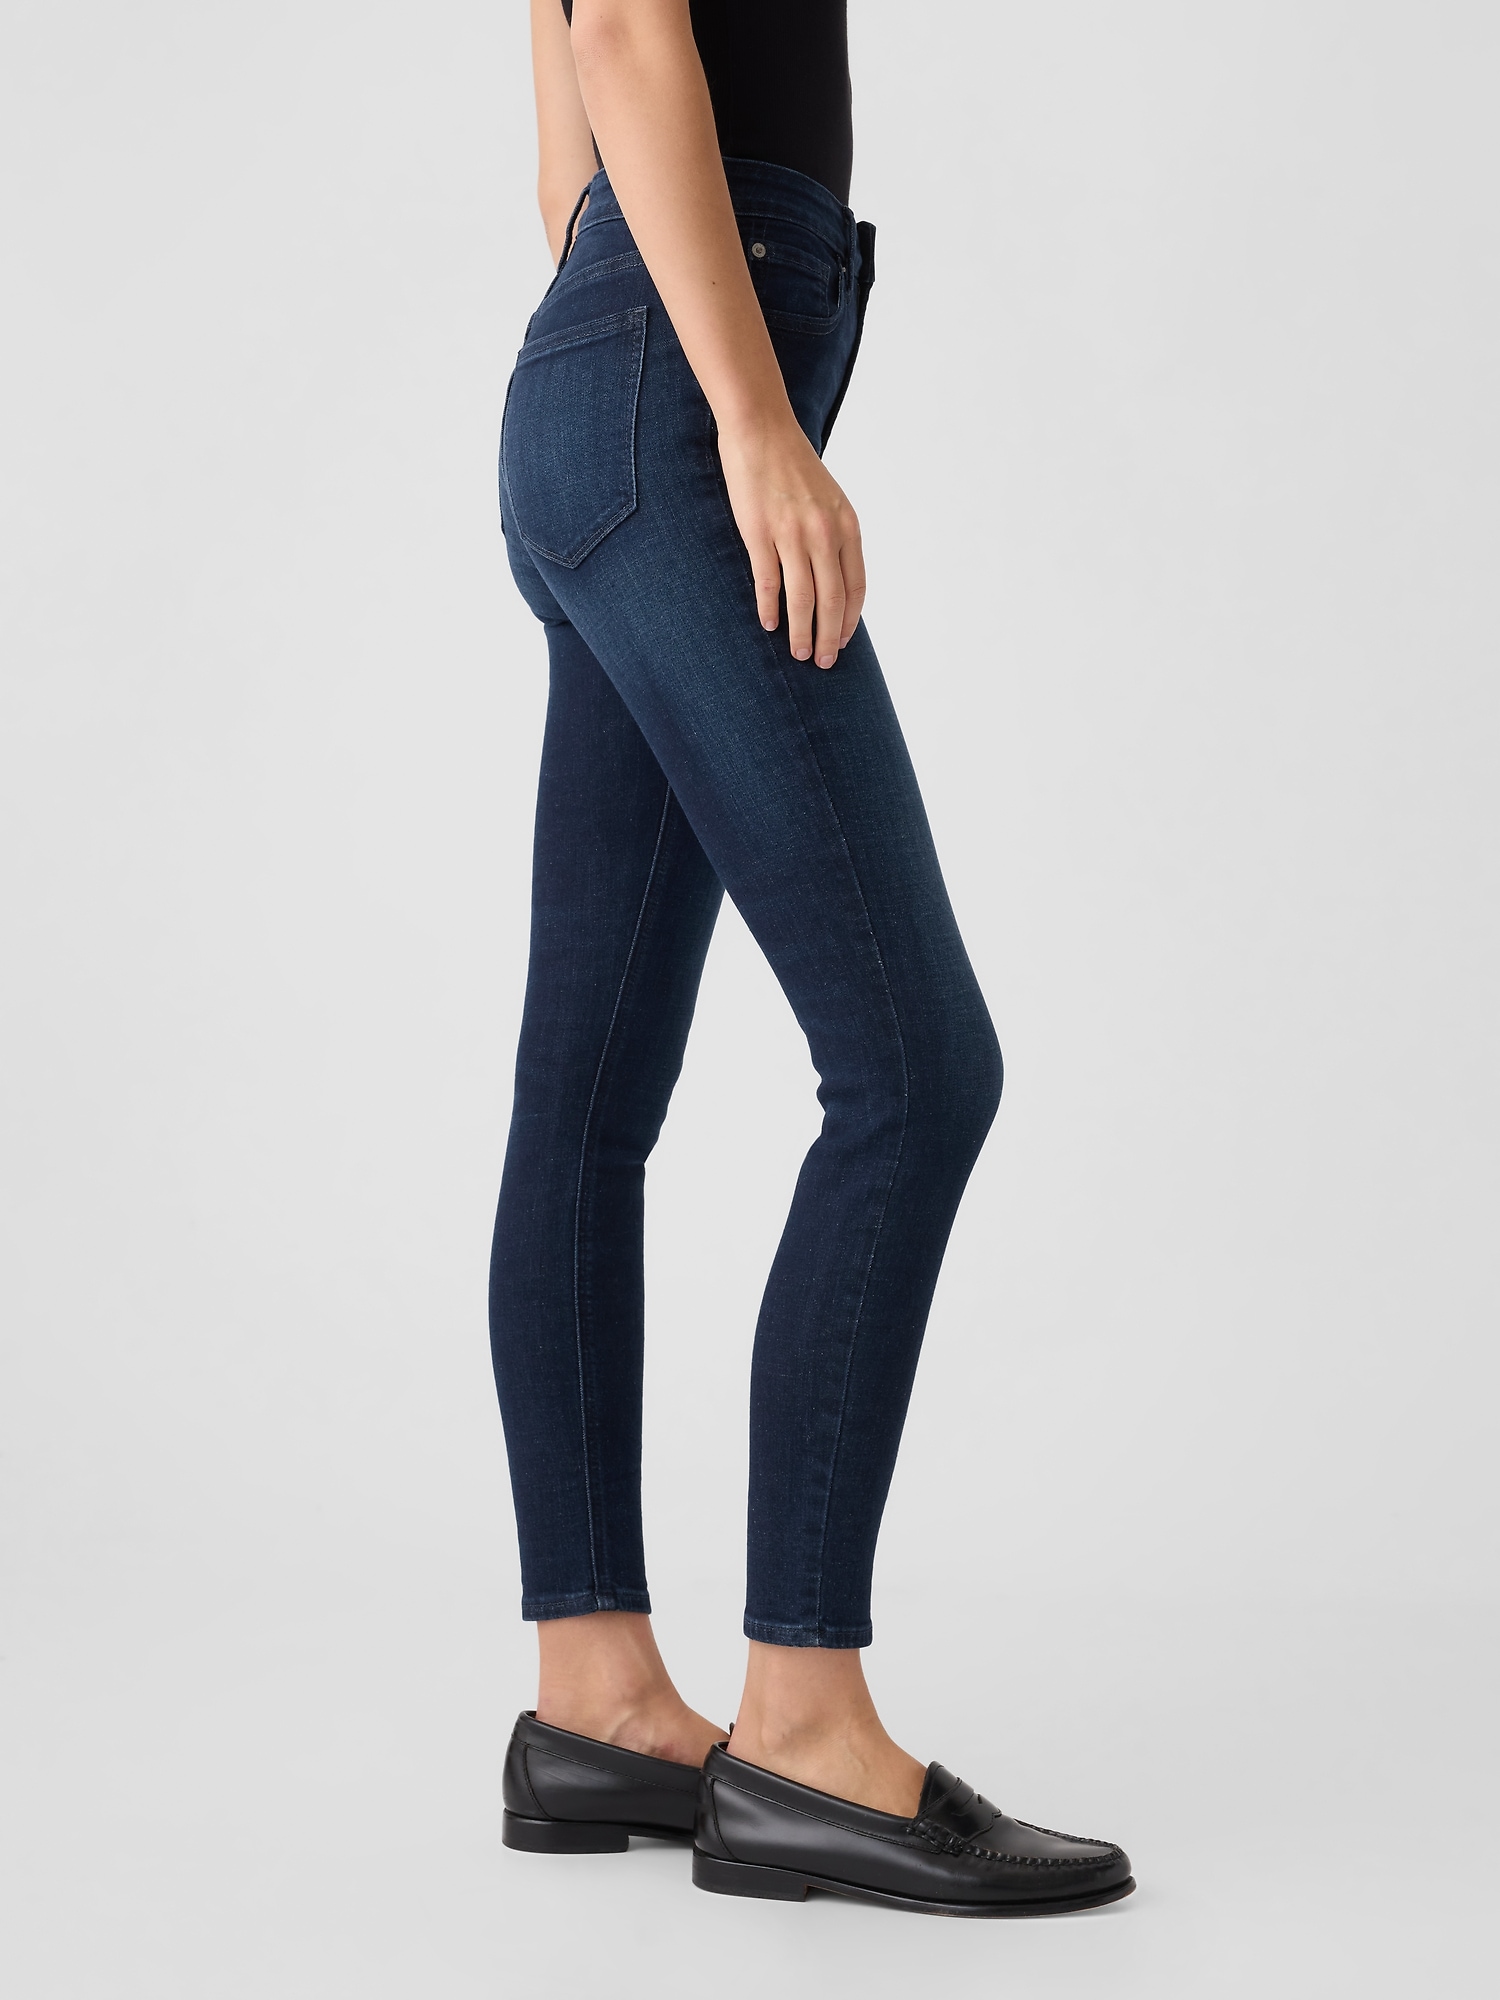 High Rise Universal Legging Jeans by Gap Online, THE ICONIC